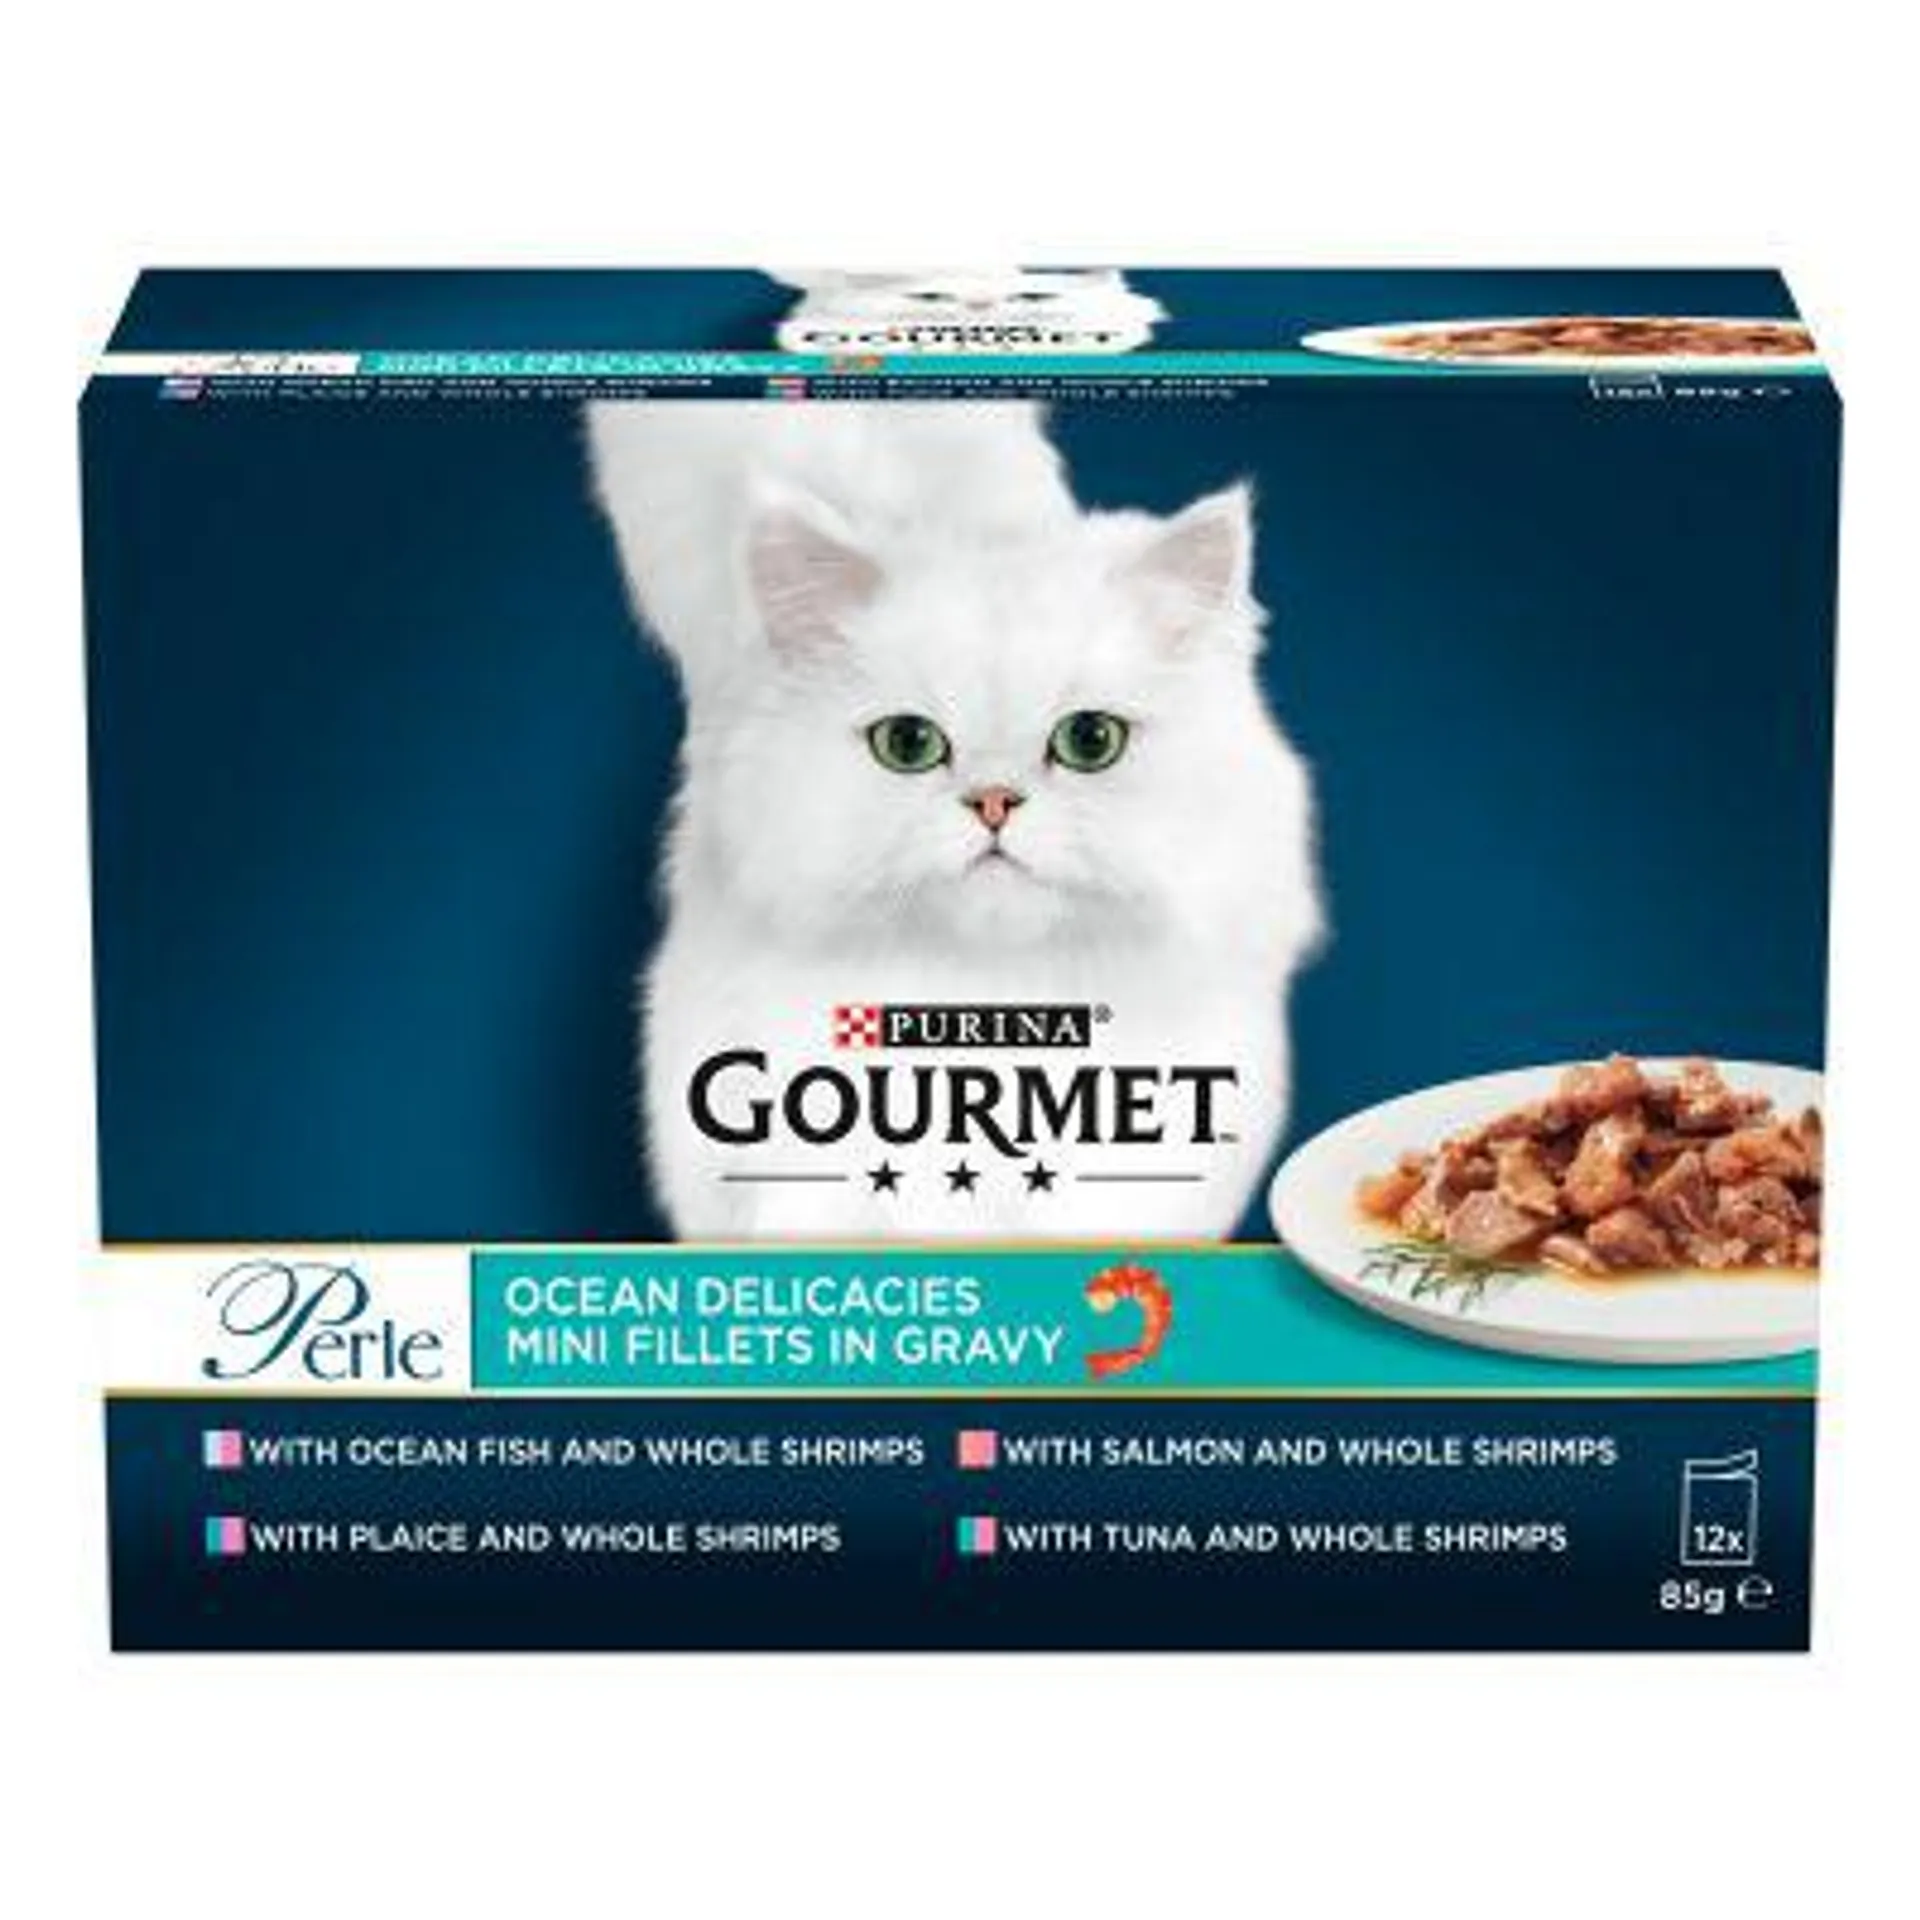 Gourmet Perle Pouches Mixed Pack